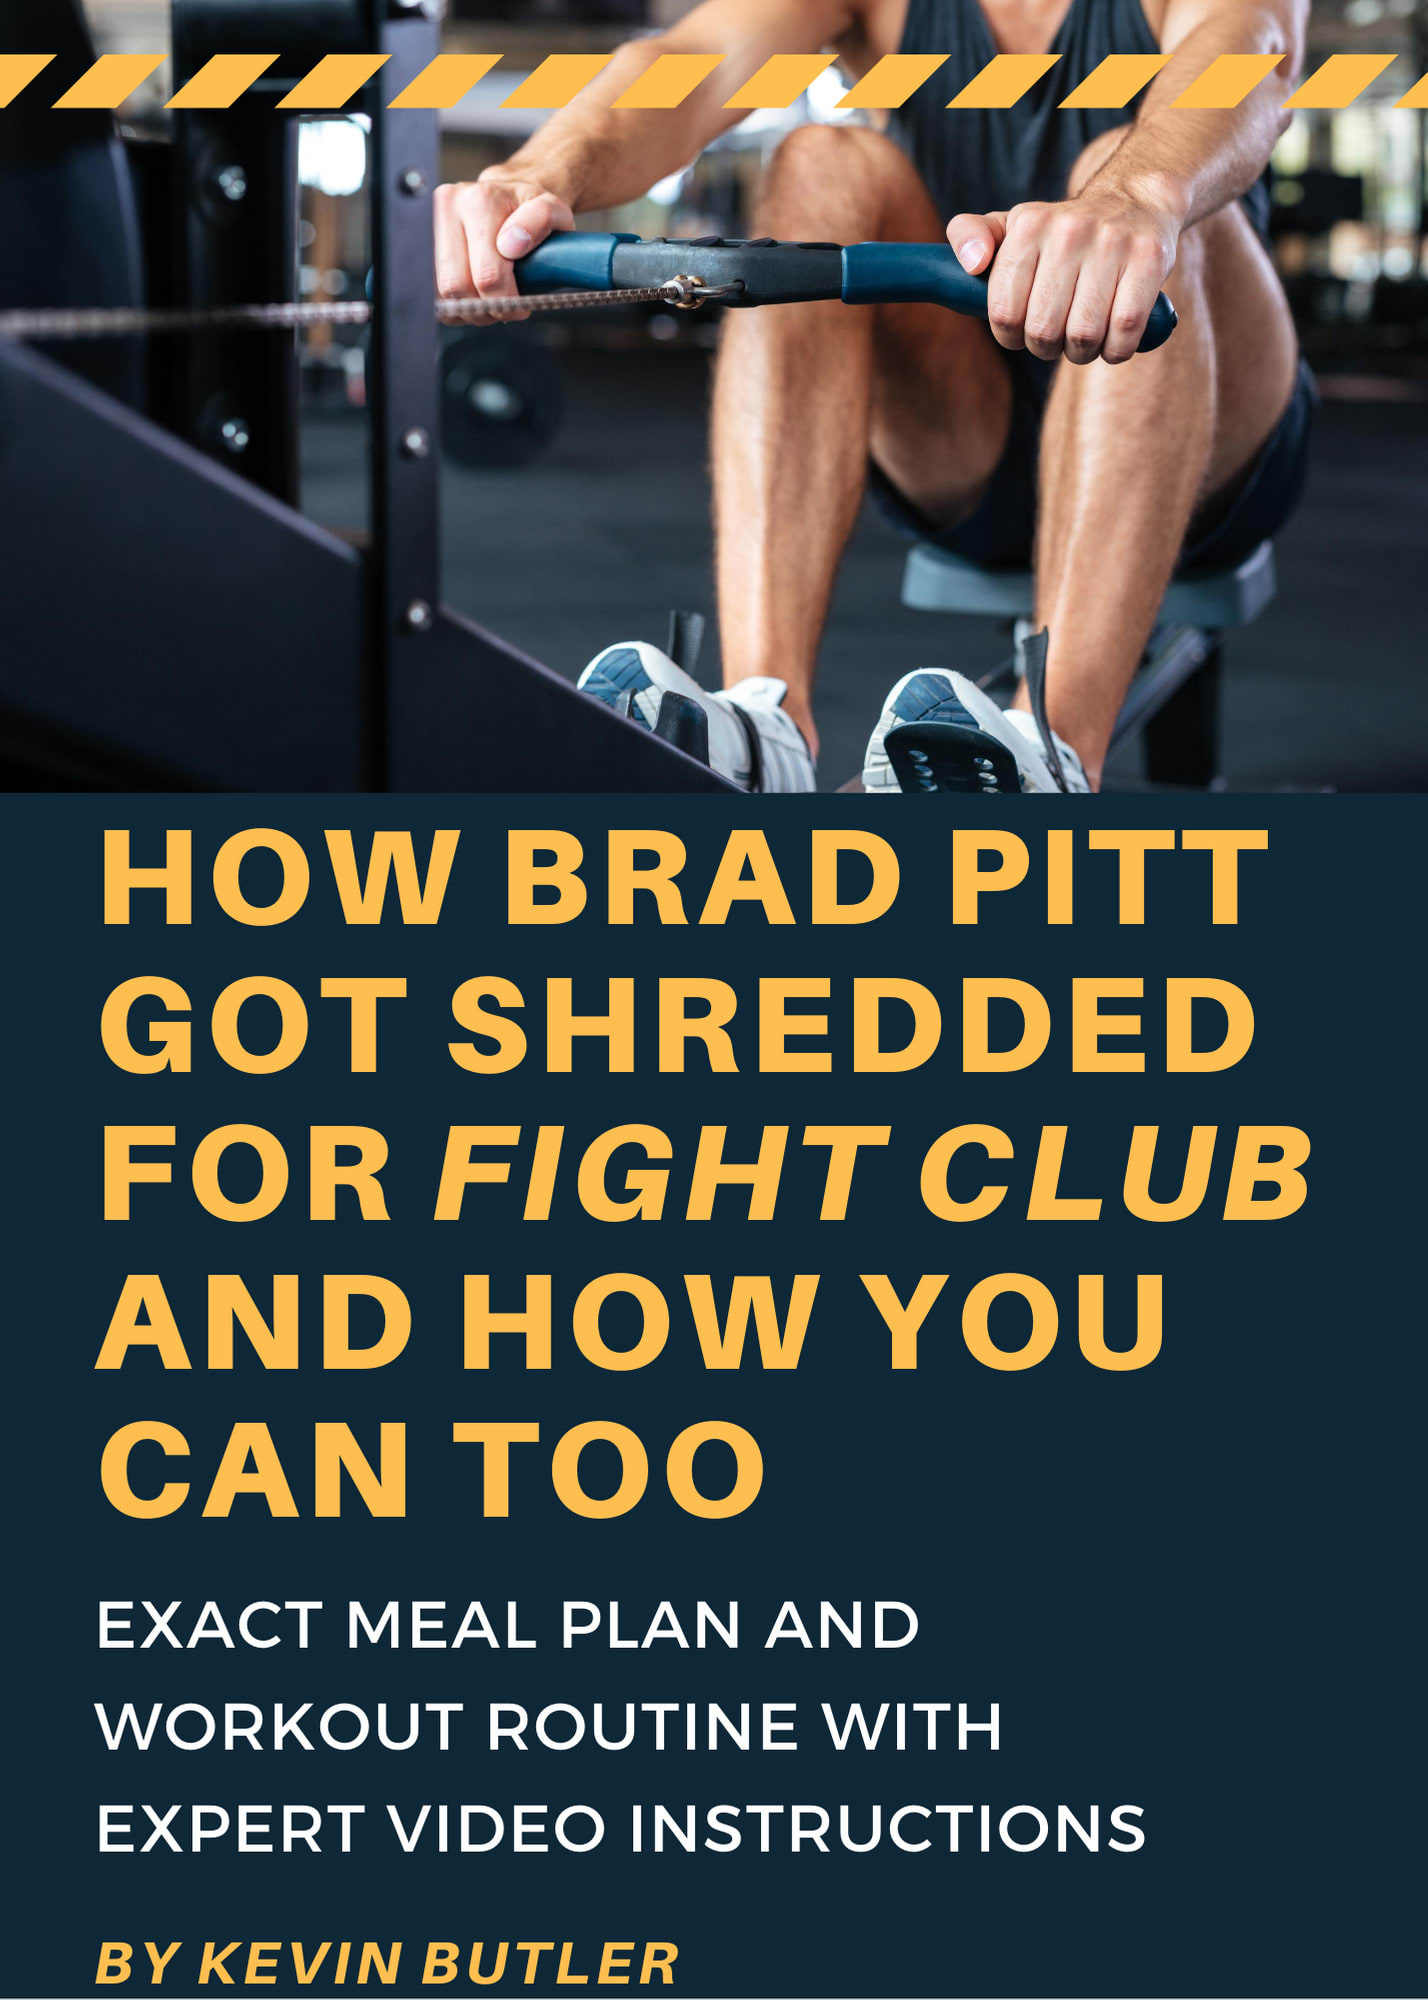 Fight club for pitts workout brad Brad Pitt